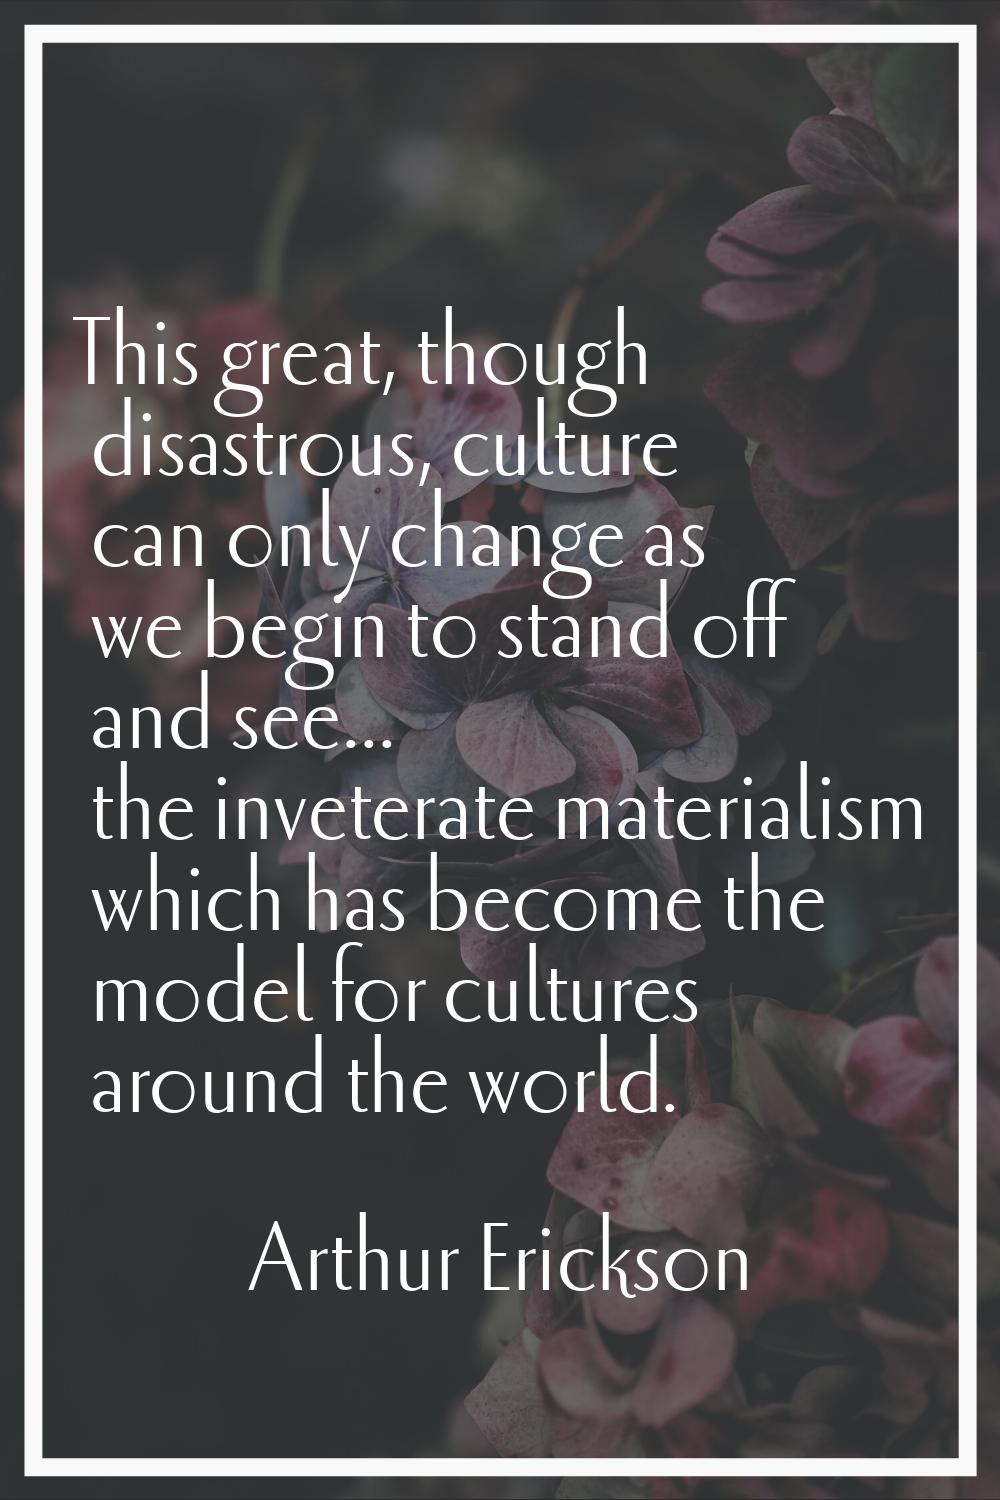 This great, though disastrous, culture can only change as we begin to stand off and see... the inve